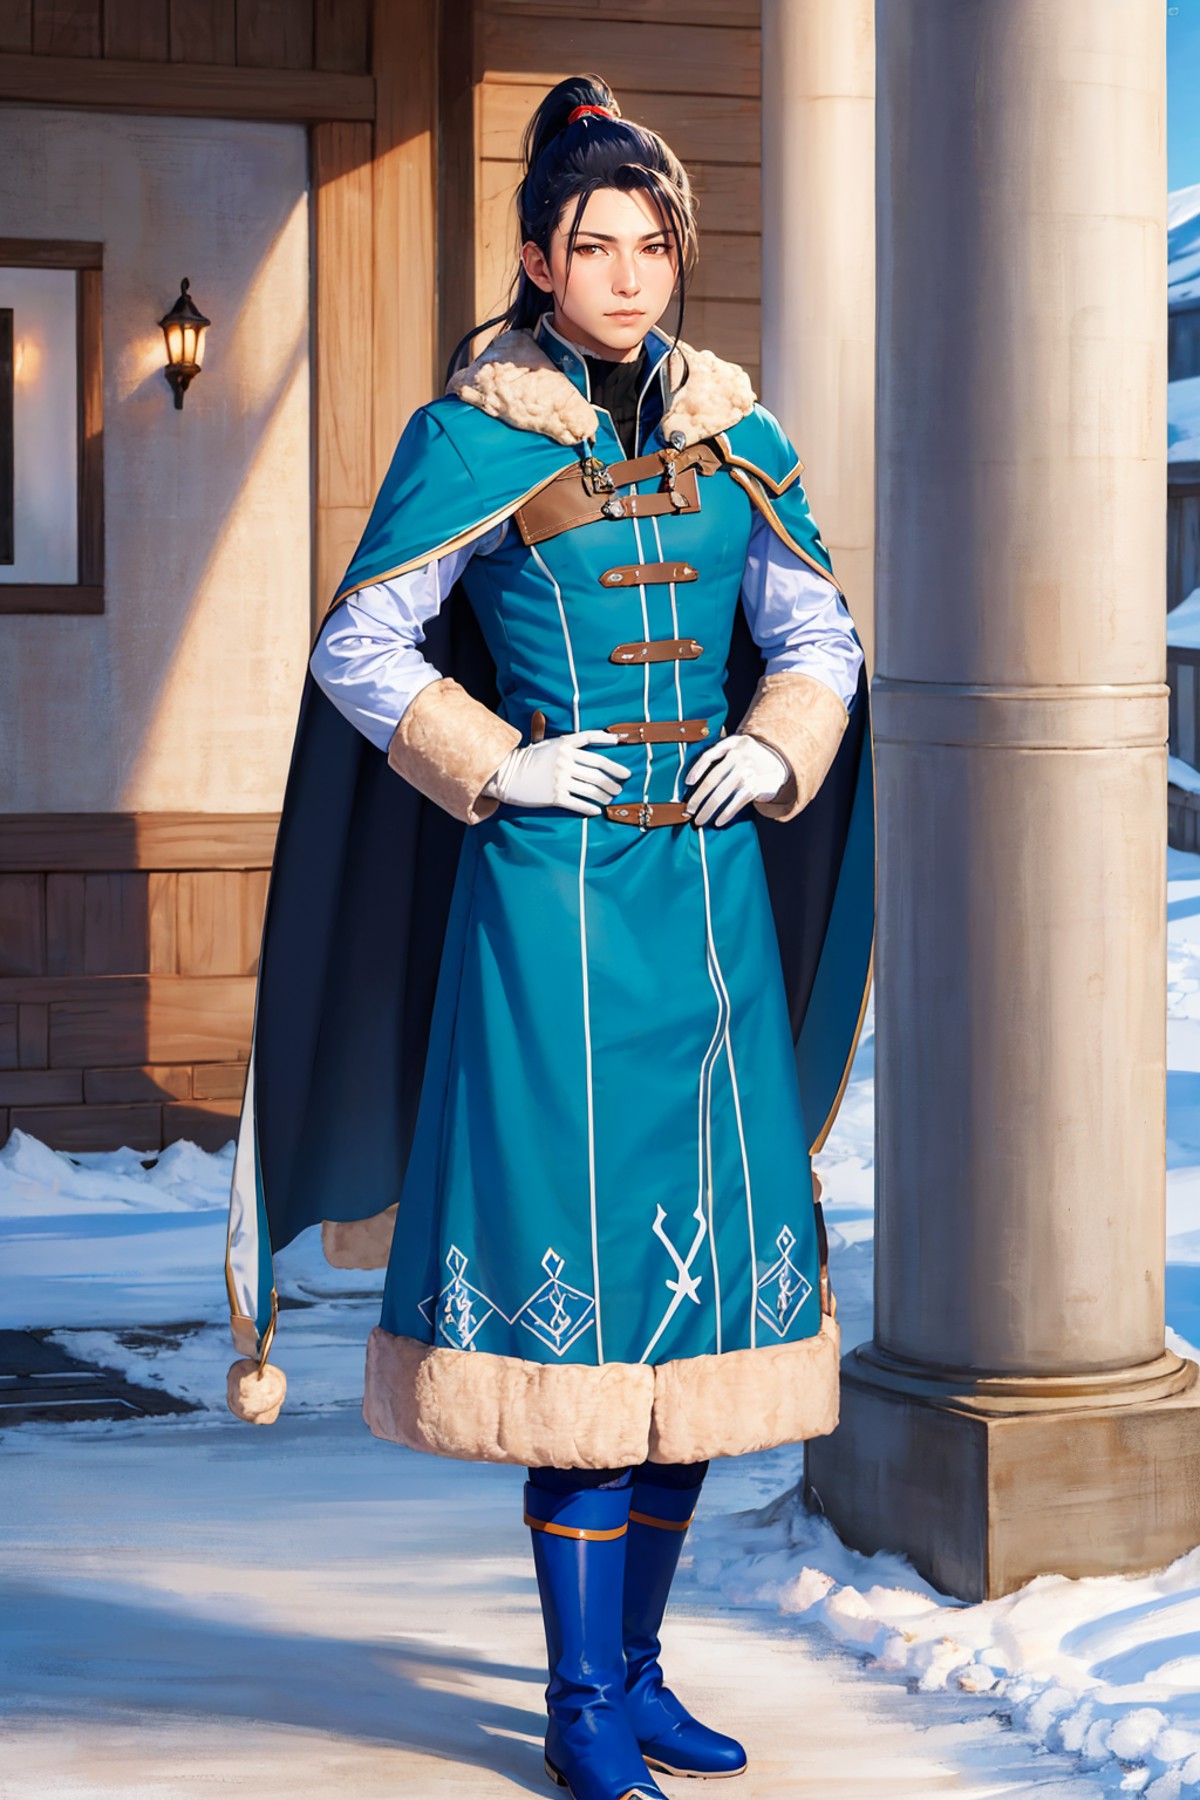 masterpiece, best quality, hopesFelix, ponytail, teal cape, teal coat, white gloves, blue boots, standing, winter, looking...